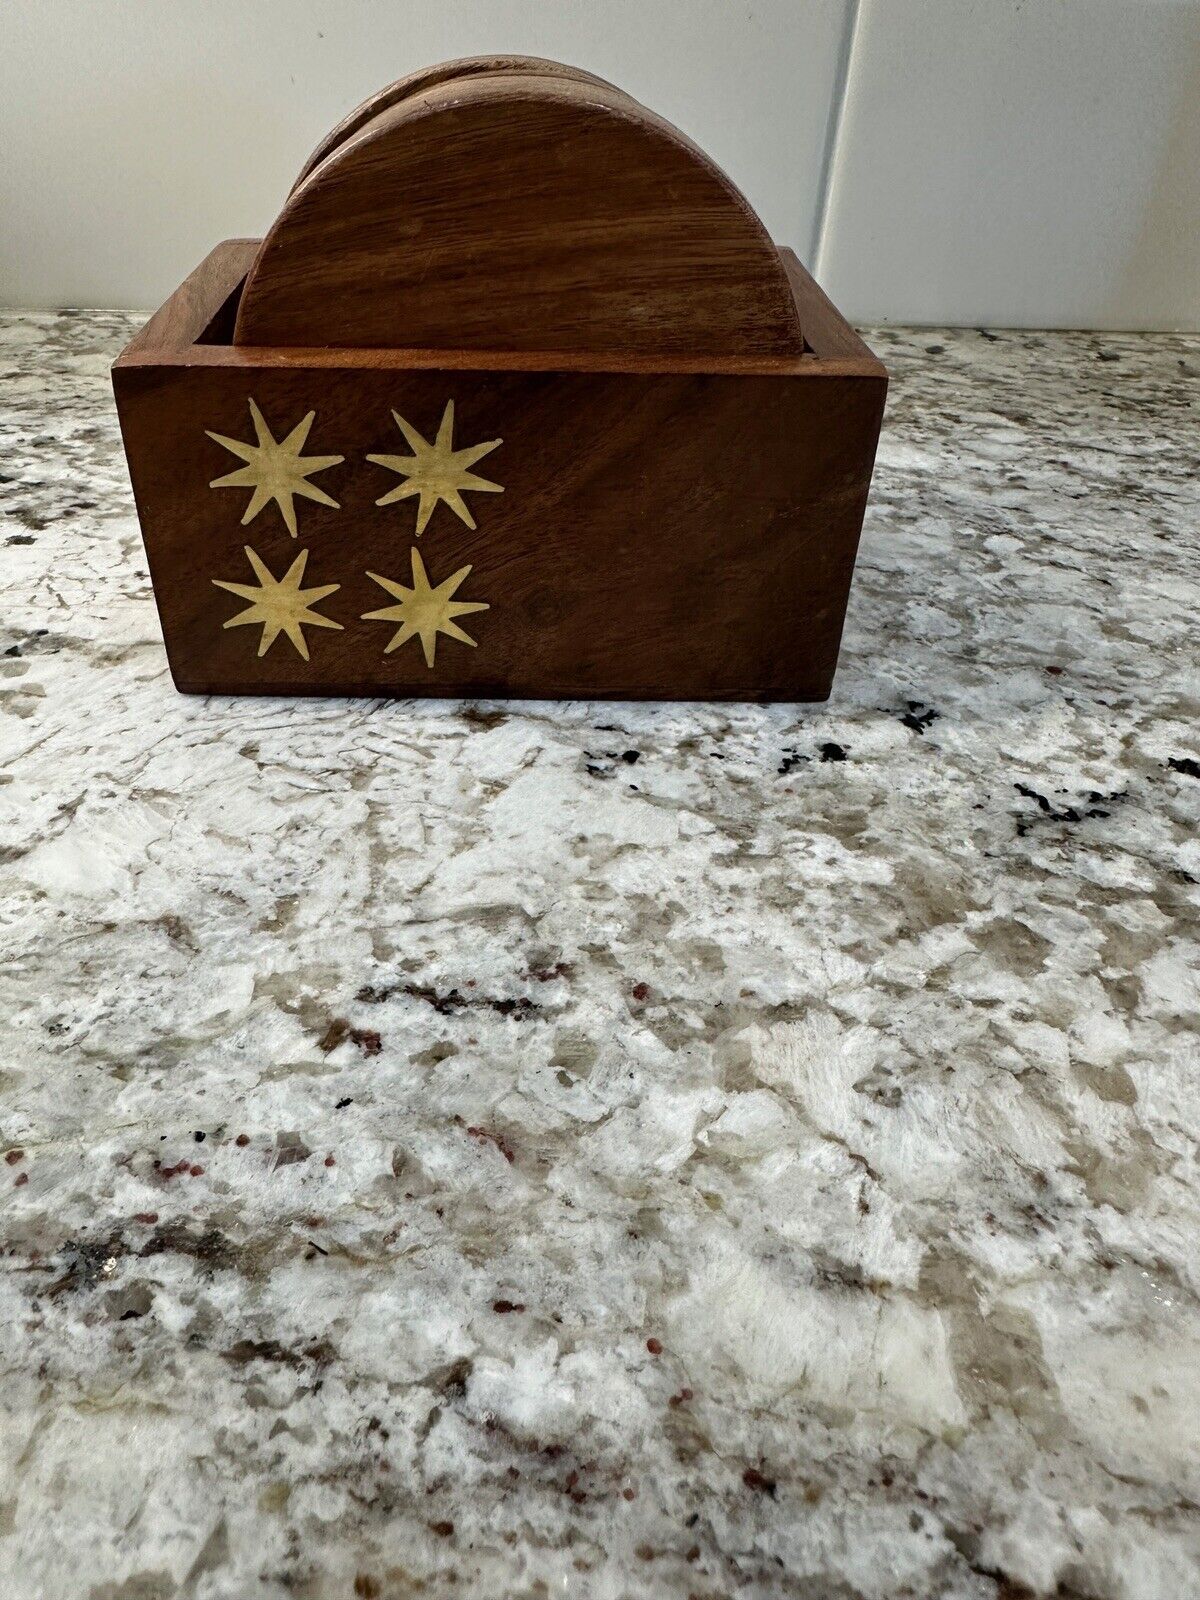 VTG MidCentury Teakwood Coasters With Wooden Case With Starbursts